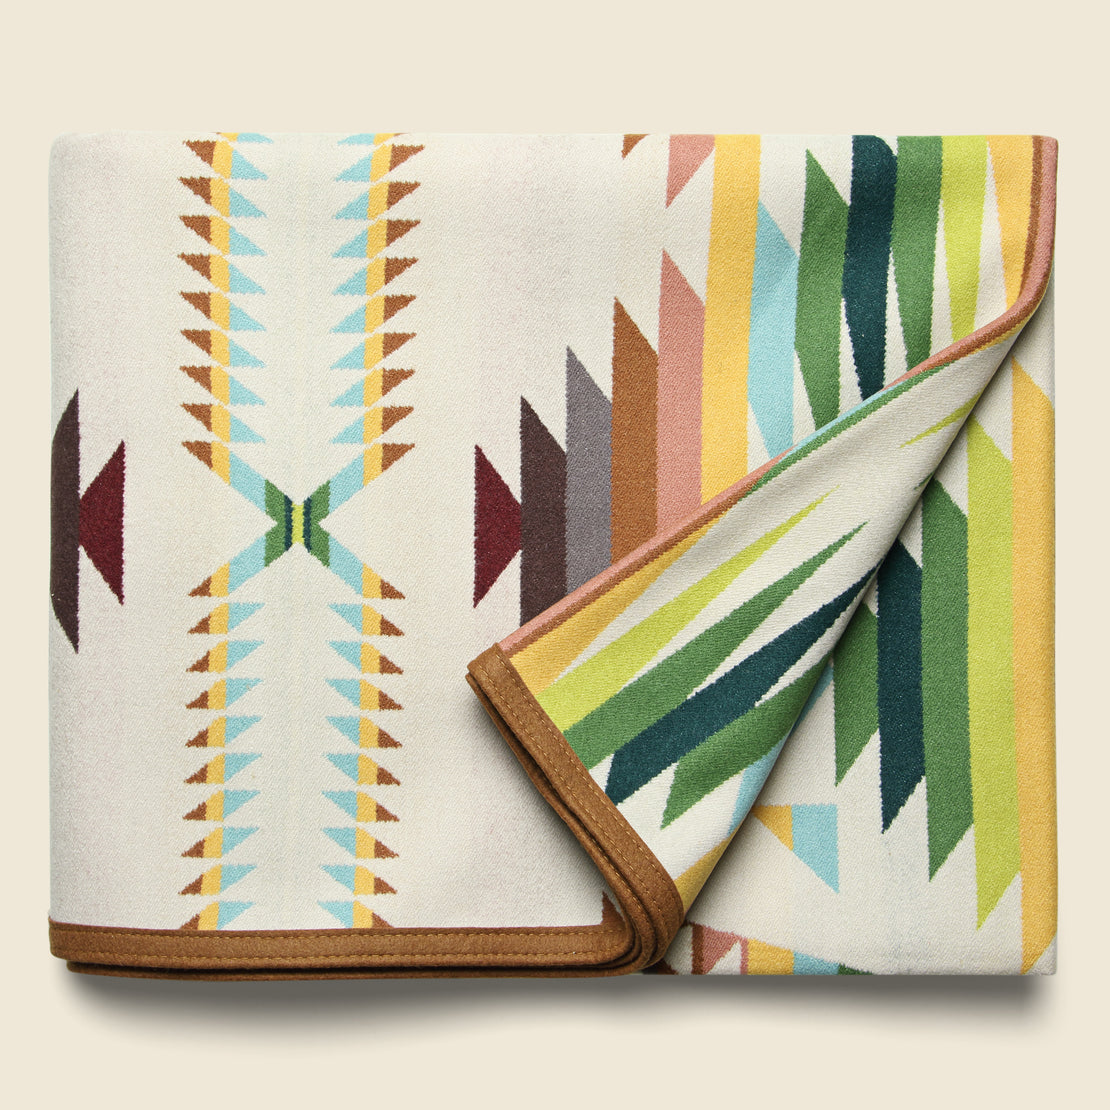 Falcon Cove Blanket - Pendleton - STAG Provisions - Home - Bed - Blanket